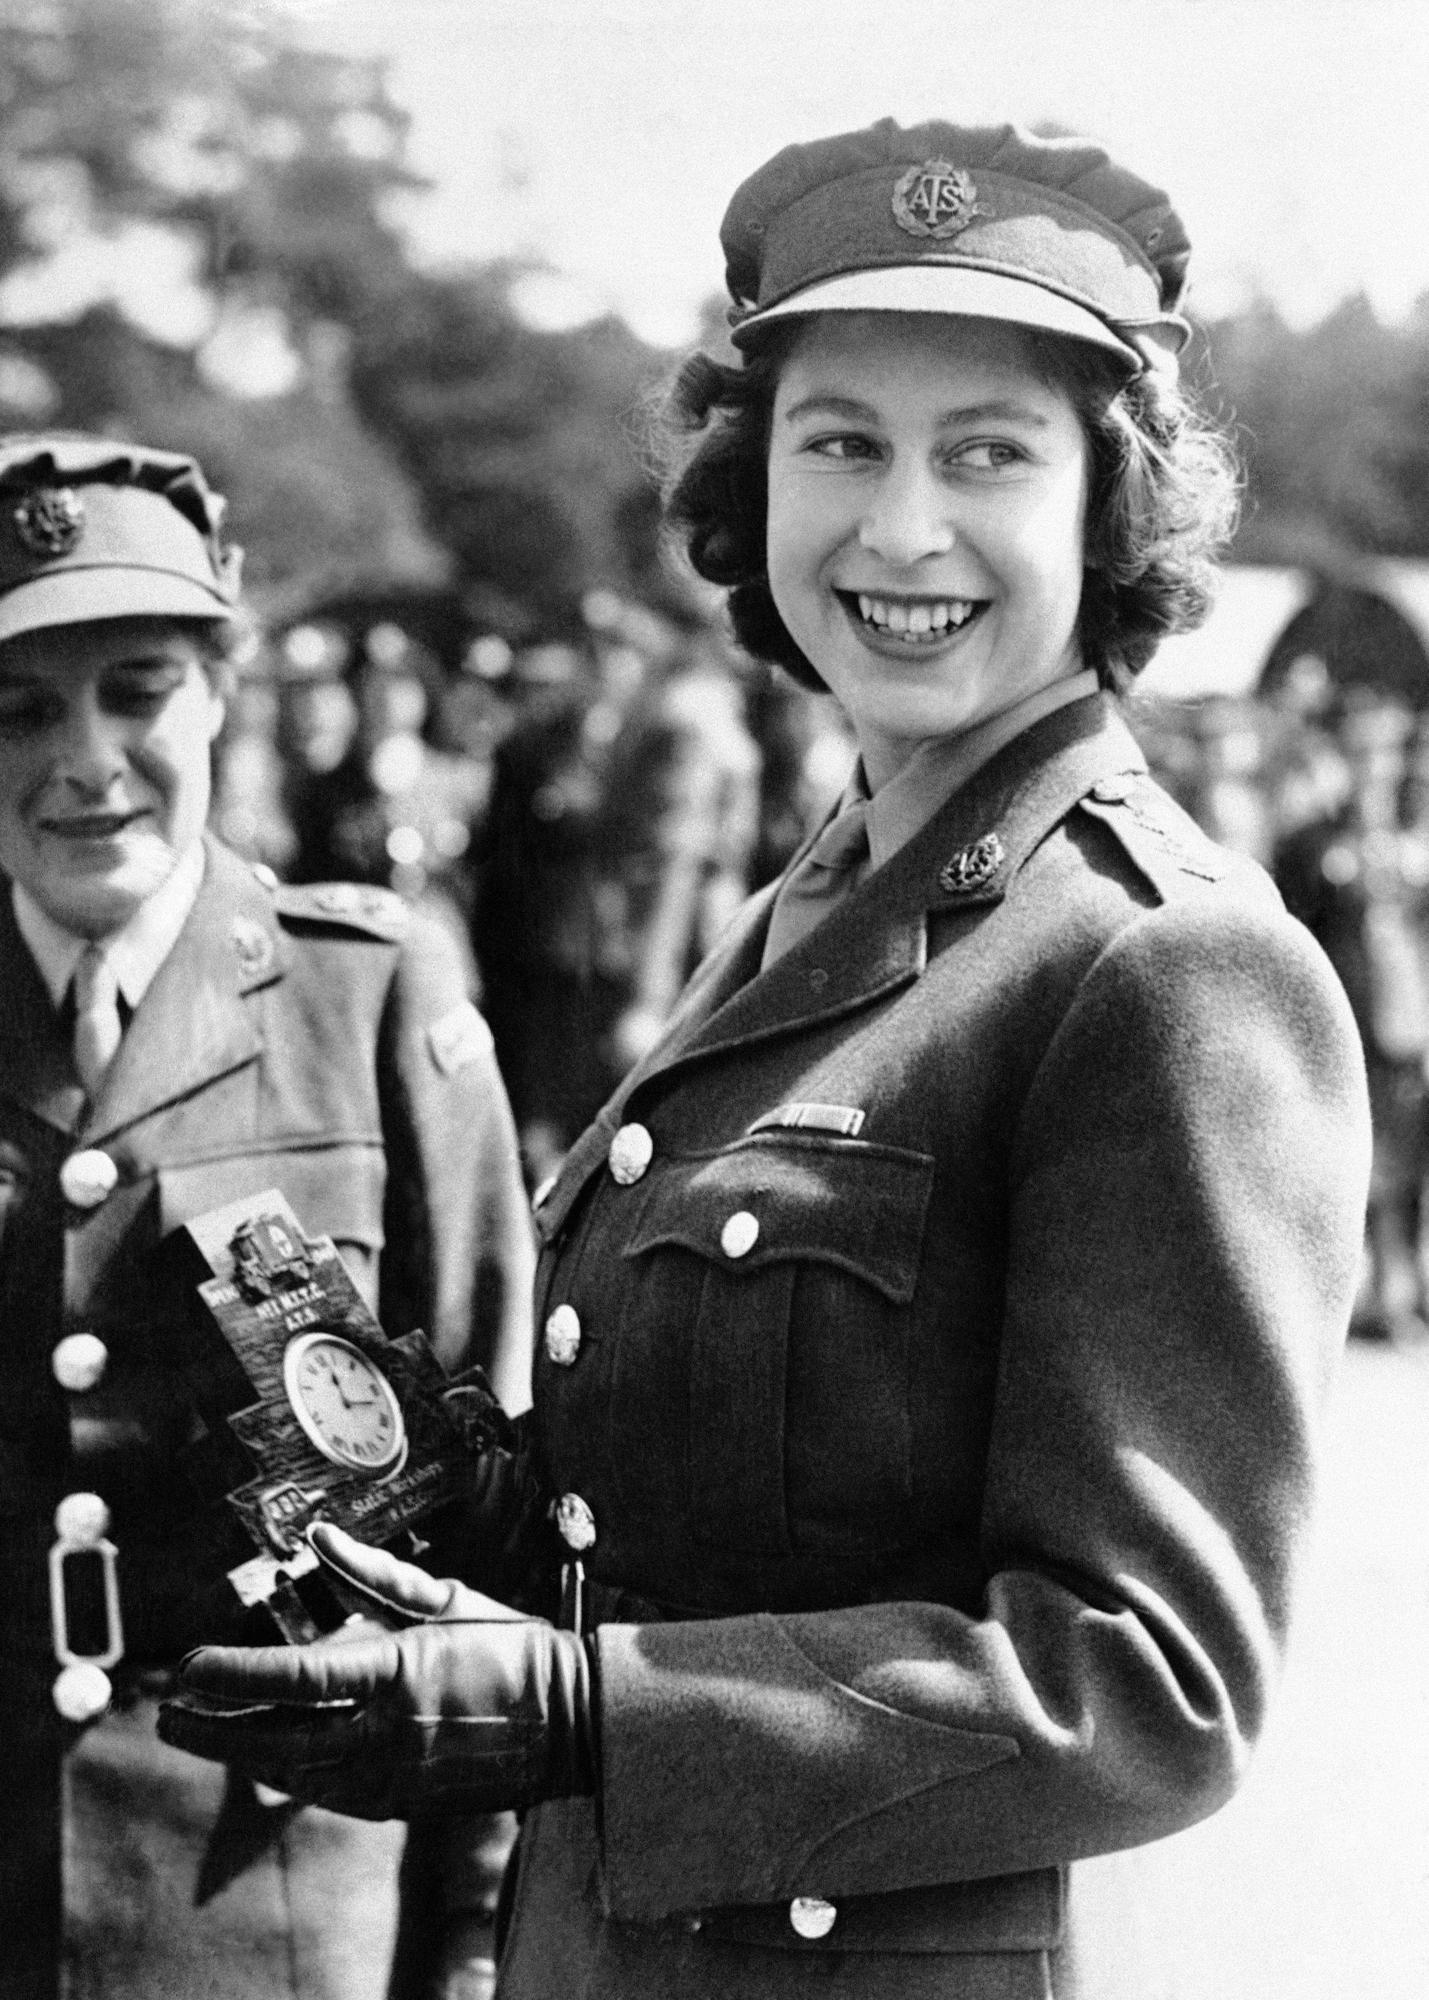 FILE - Britain's Princess Elizabeth, a Junior Commander in the Auxiliary Territorial Service, receives a clock presented to her by her old associates at the camp where she received her early training, during a ceremony at the No. 1 M.T. Training Center, in Camberley, England, Aug. 3, 1945. (AP Photo, File)